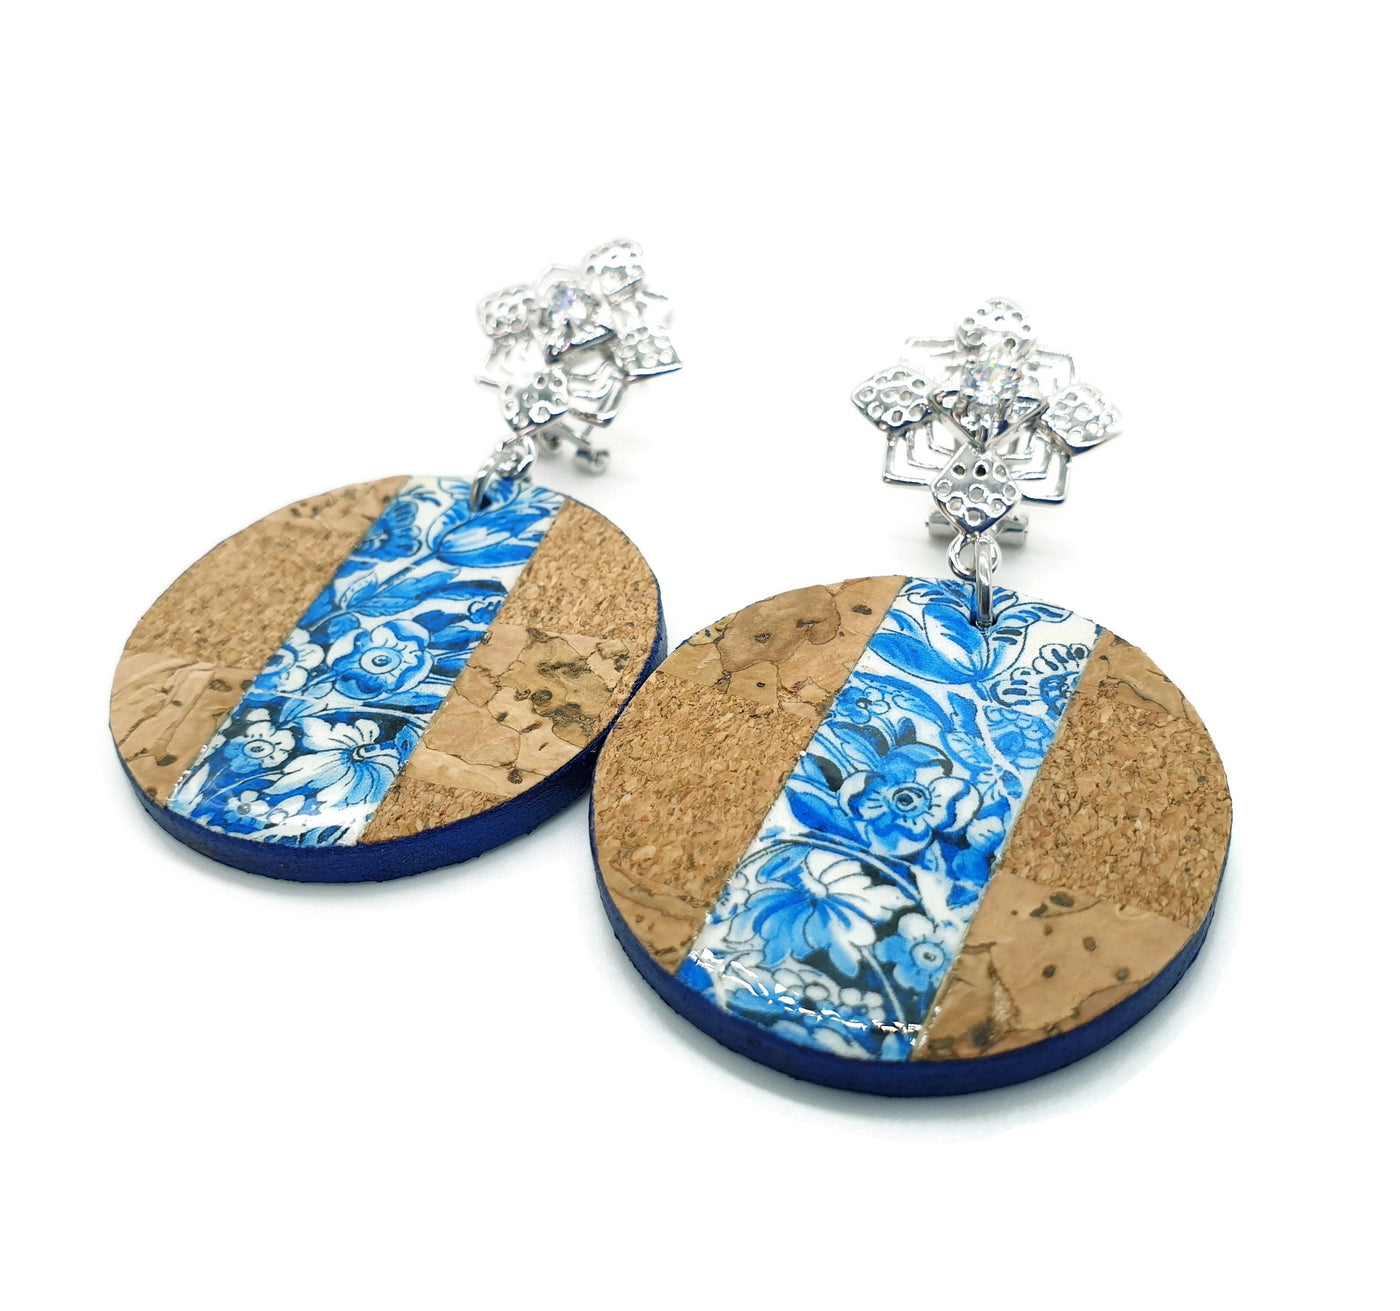 CLEMENTINA - Portugal Round Tile Wood & Cork Earrings